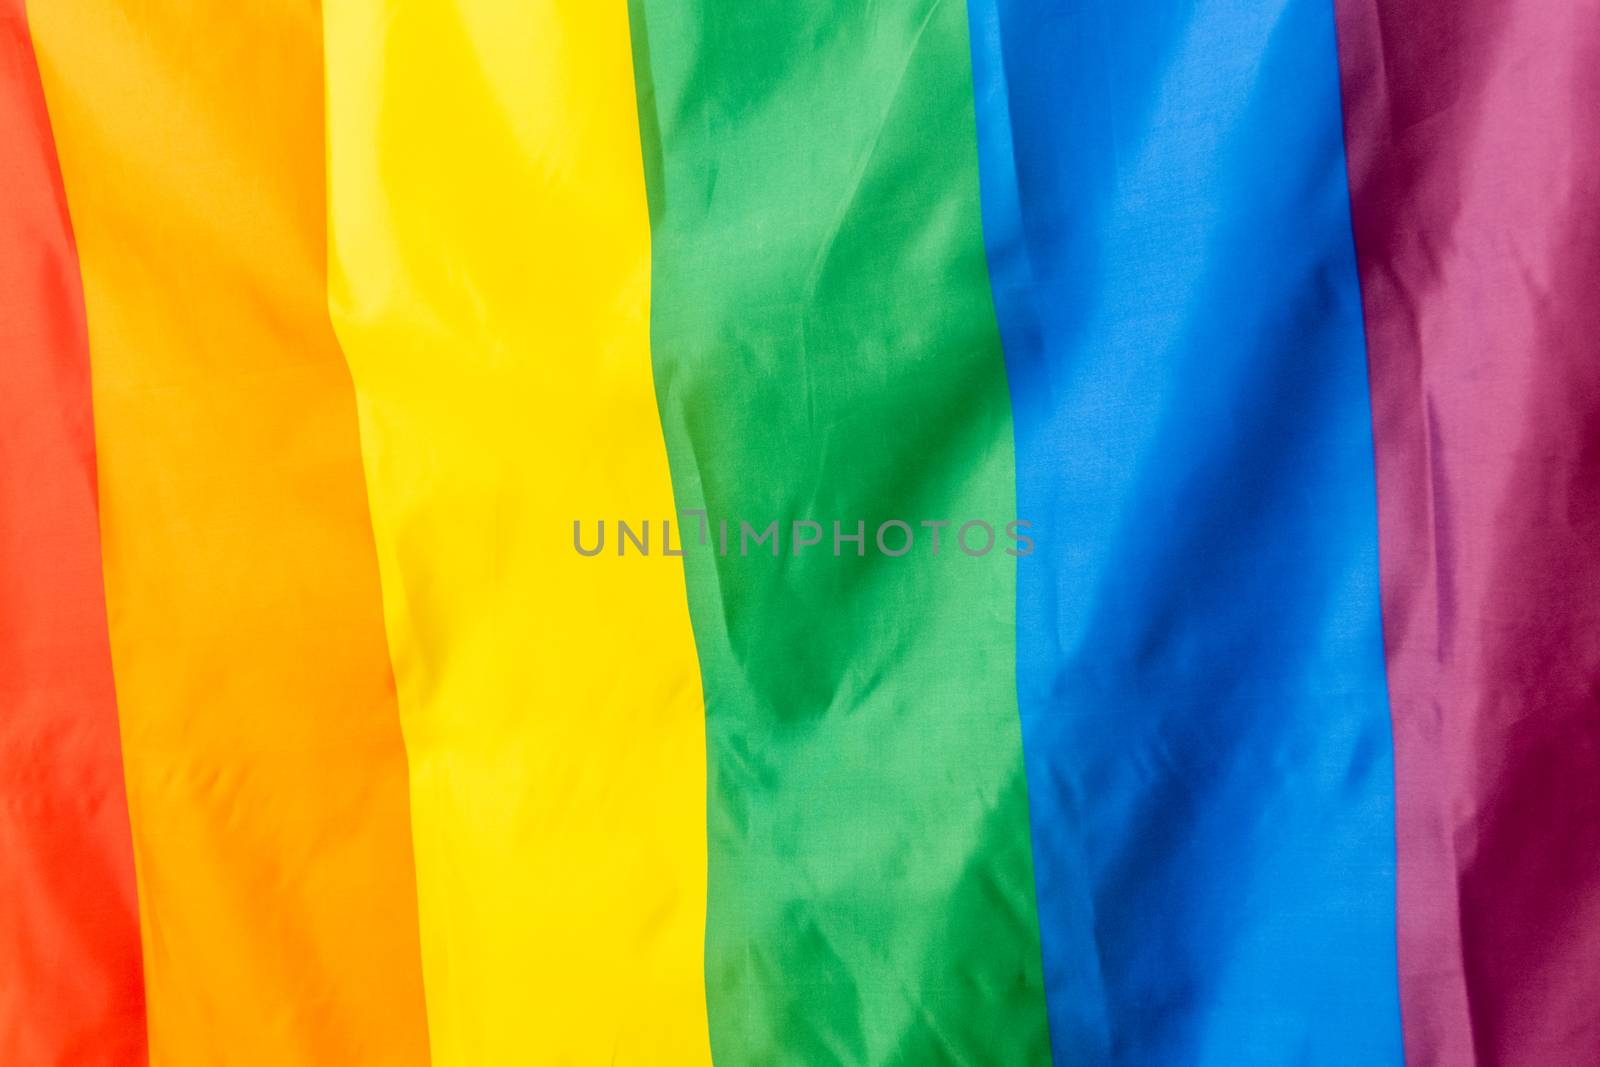 The Rainbow Flag, used as a symbol of lesbian, gay, bisexual, transgender, and queer (LGBTQ) pride and LGBTQ social movements.